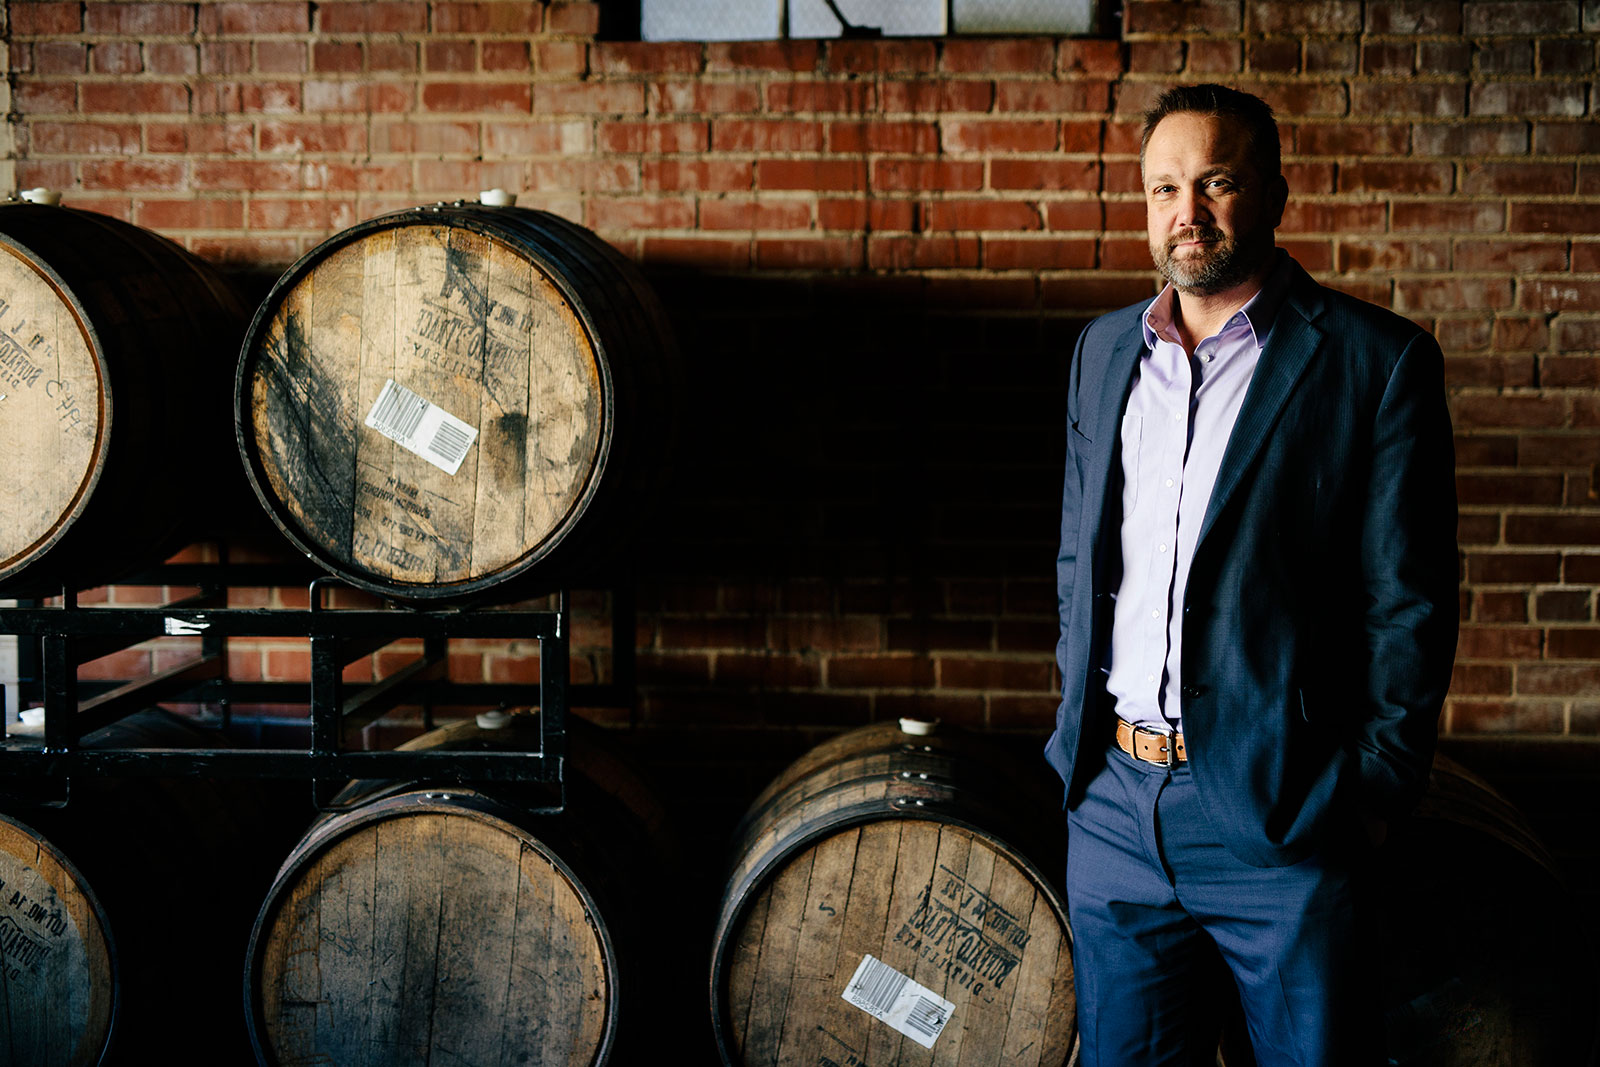 A man in a suit standing in front of barrels.